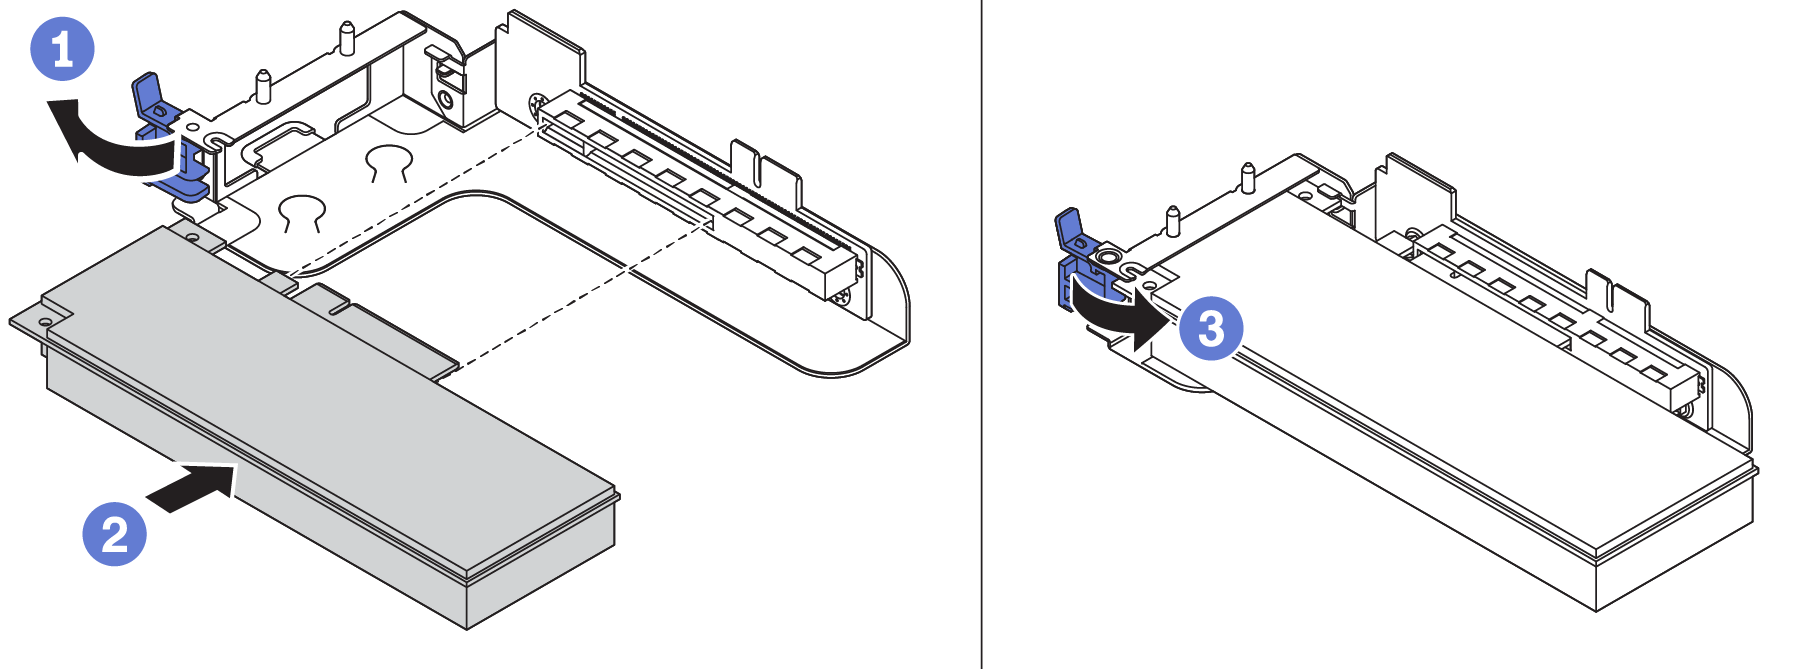 Install a PCIe adapter into internal riser assembly with only one LP slot